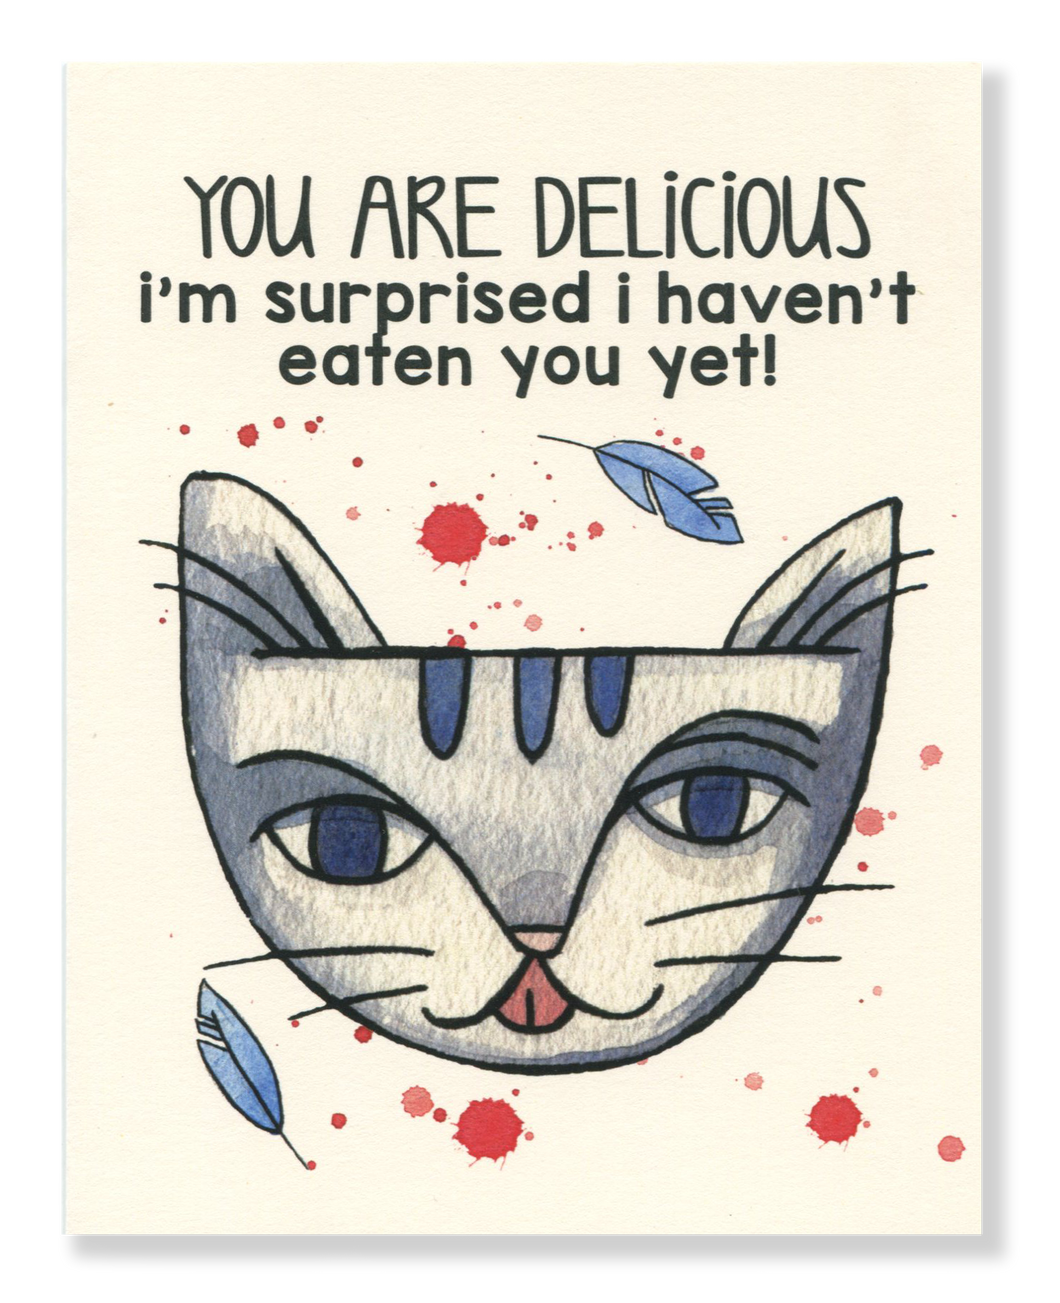 You Are Delicious card